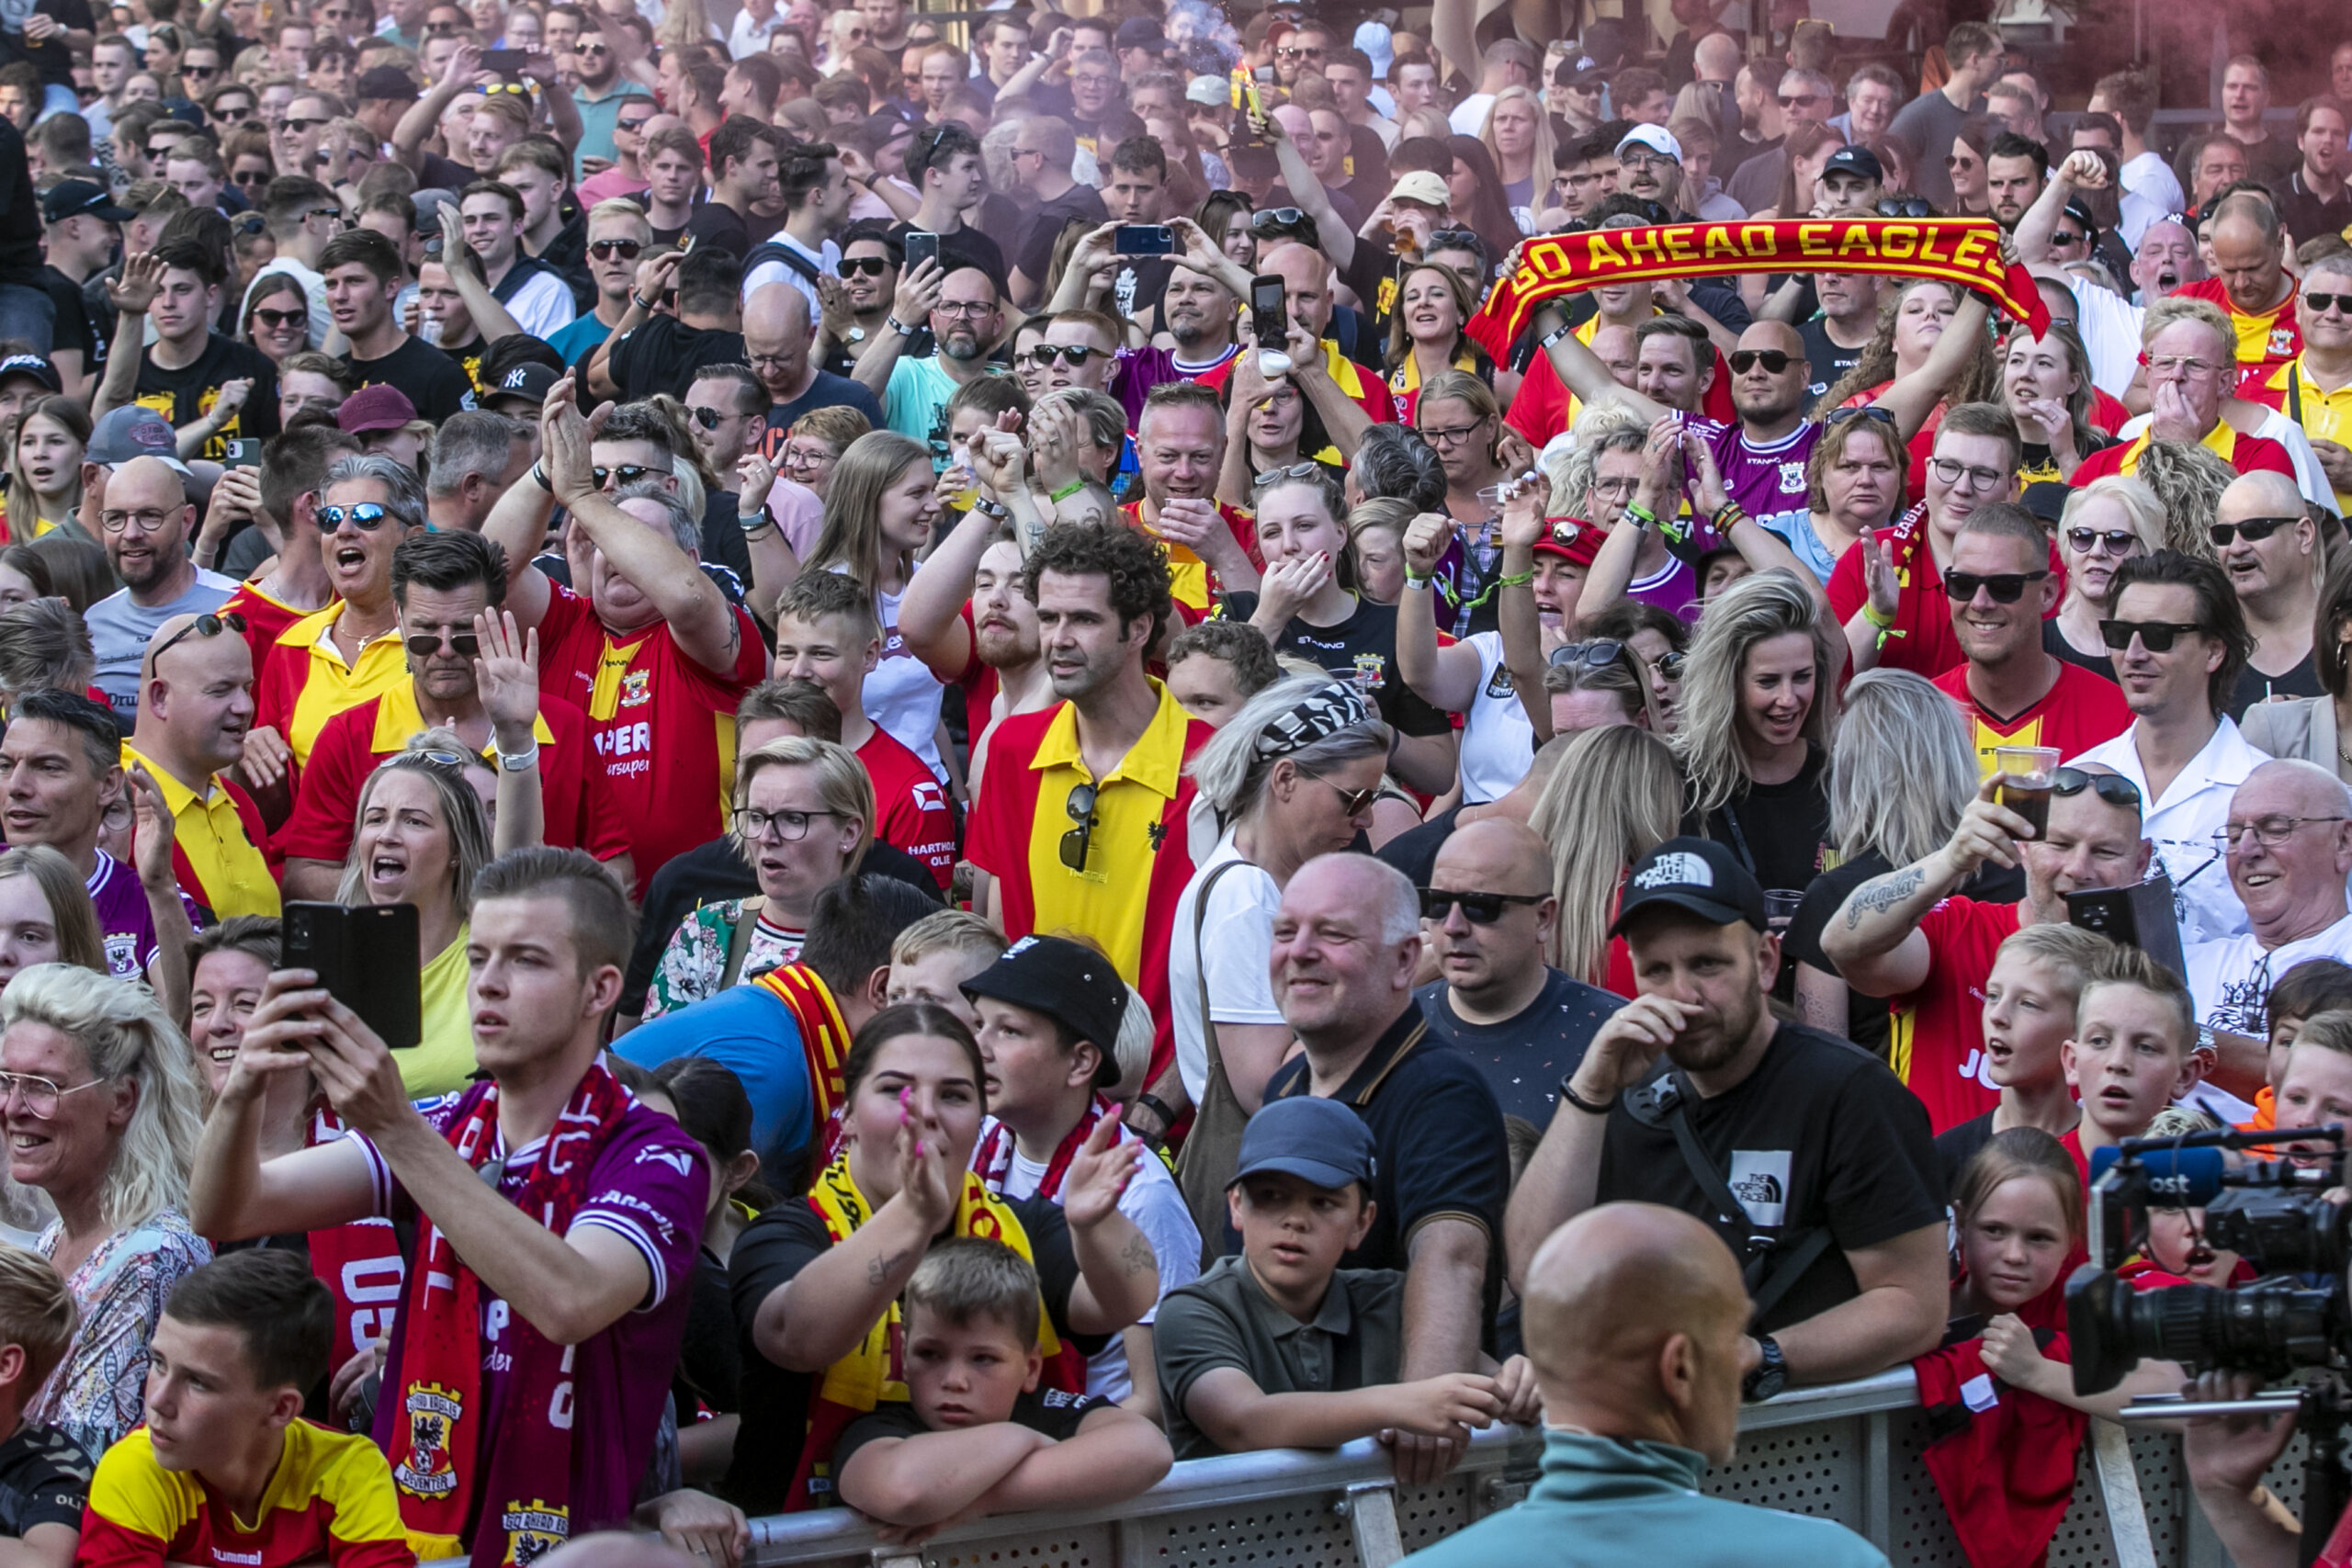 Netherlands: Tribute Go Ahead Eagles And The Brink In Deventer